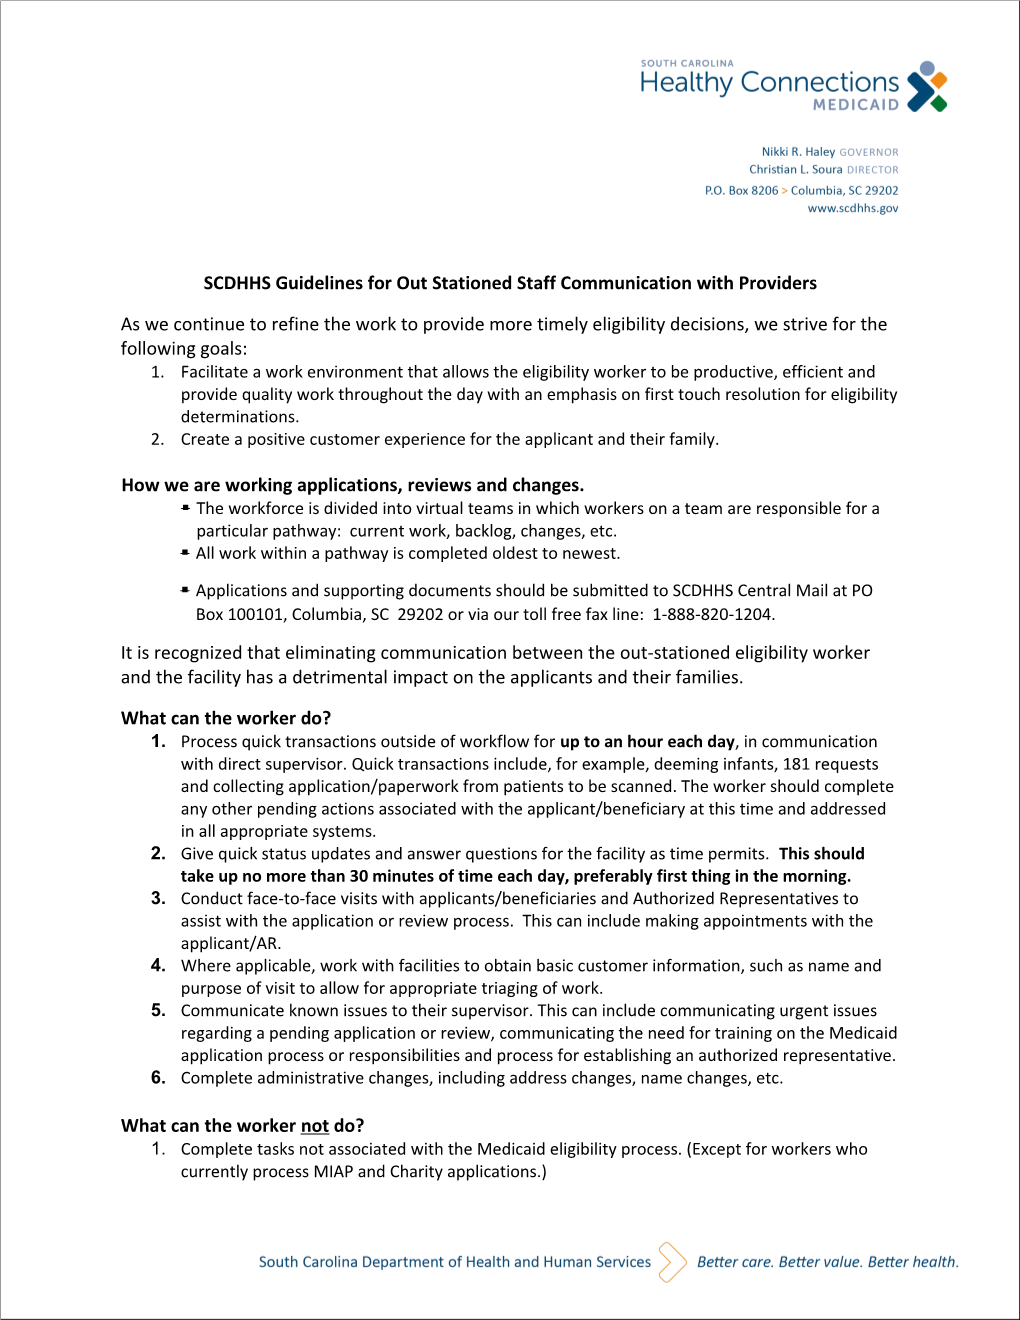 SCDHHS Guidelines for out Stationed Staff Communication with Providers